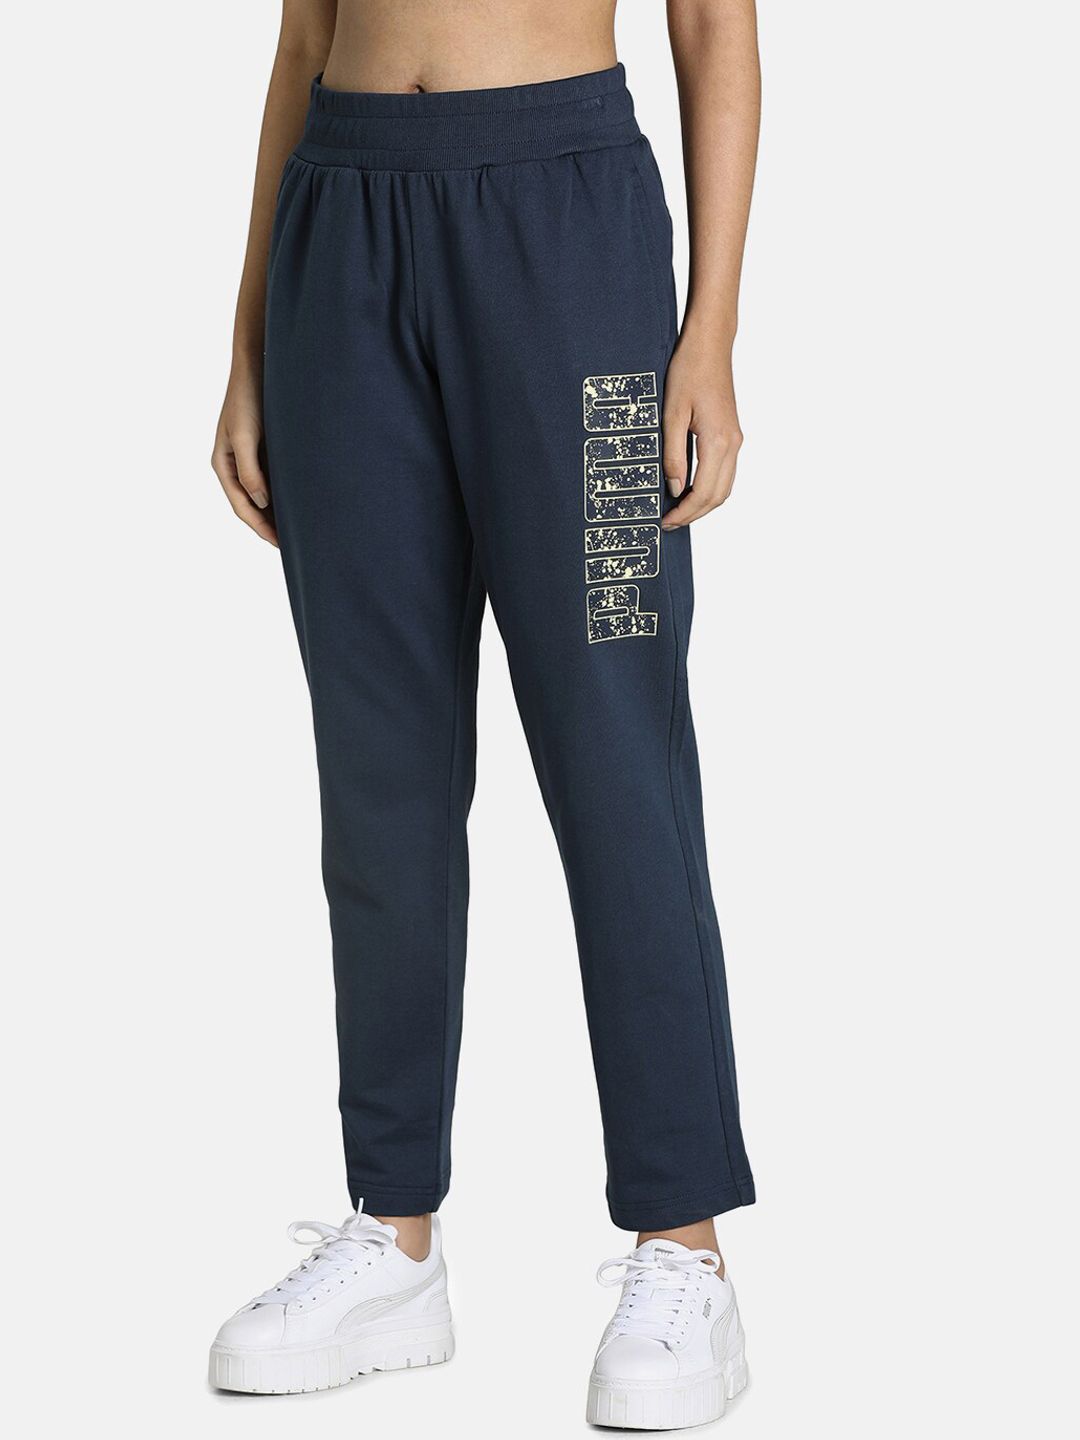 Puma Women Navy Blue Solid Dry Cell Cotton Regular Fit Trackpants Price in India